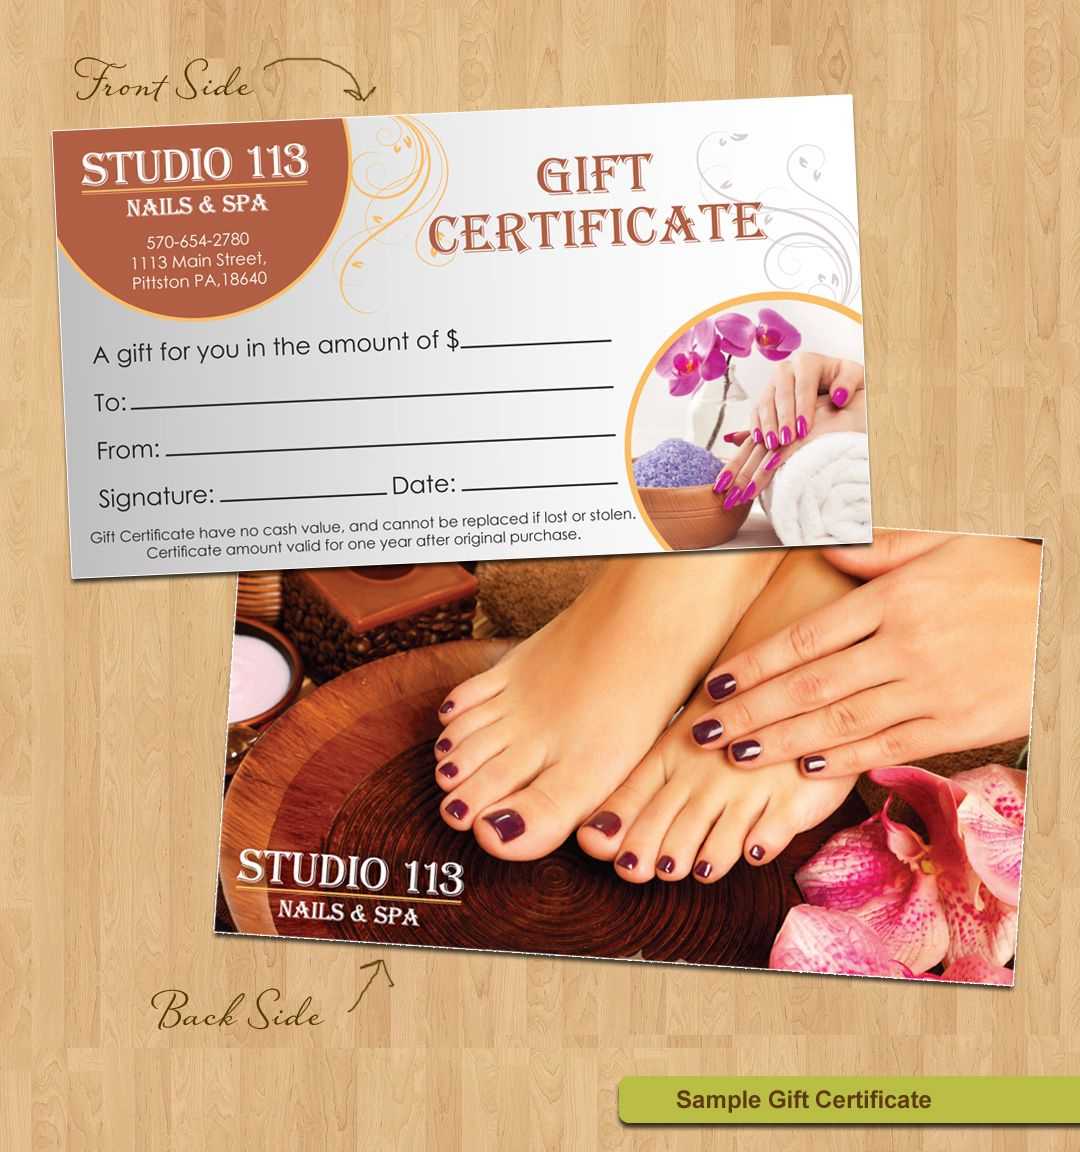 Gift Certificate For Viva Nails In Brentwood | Certificate With Nail Gift Certificate Template Free